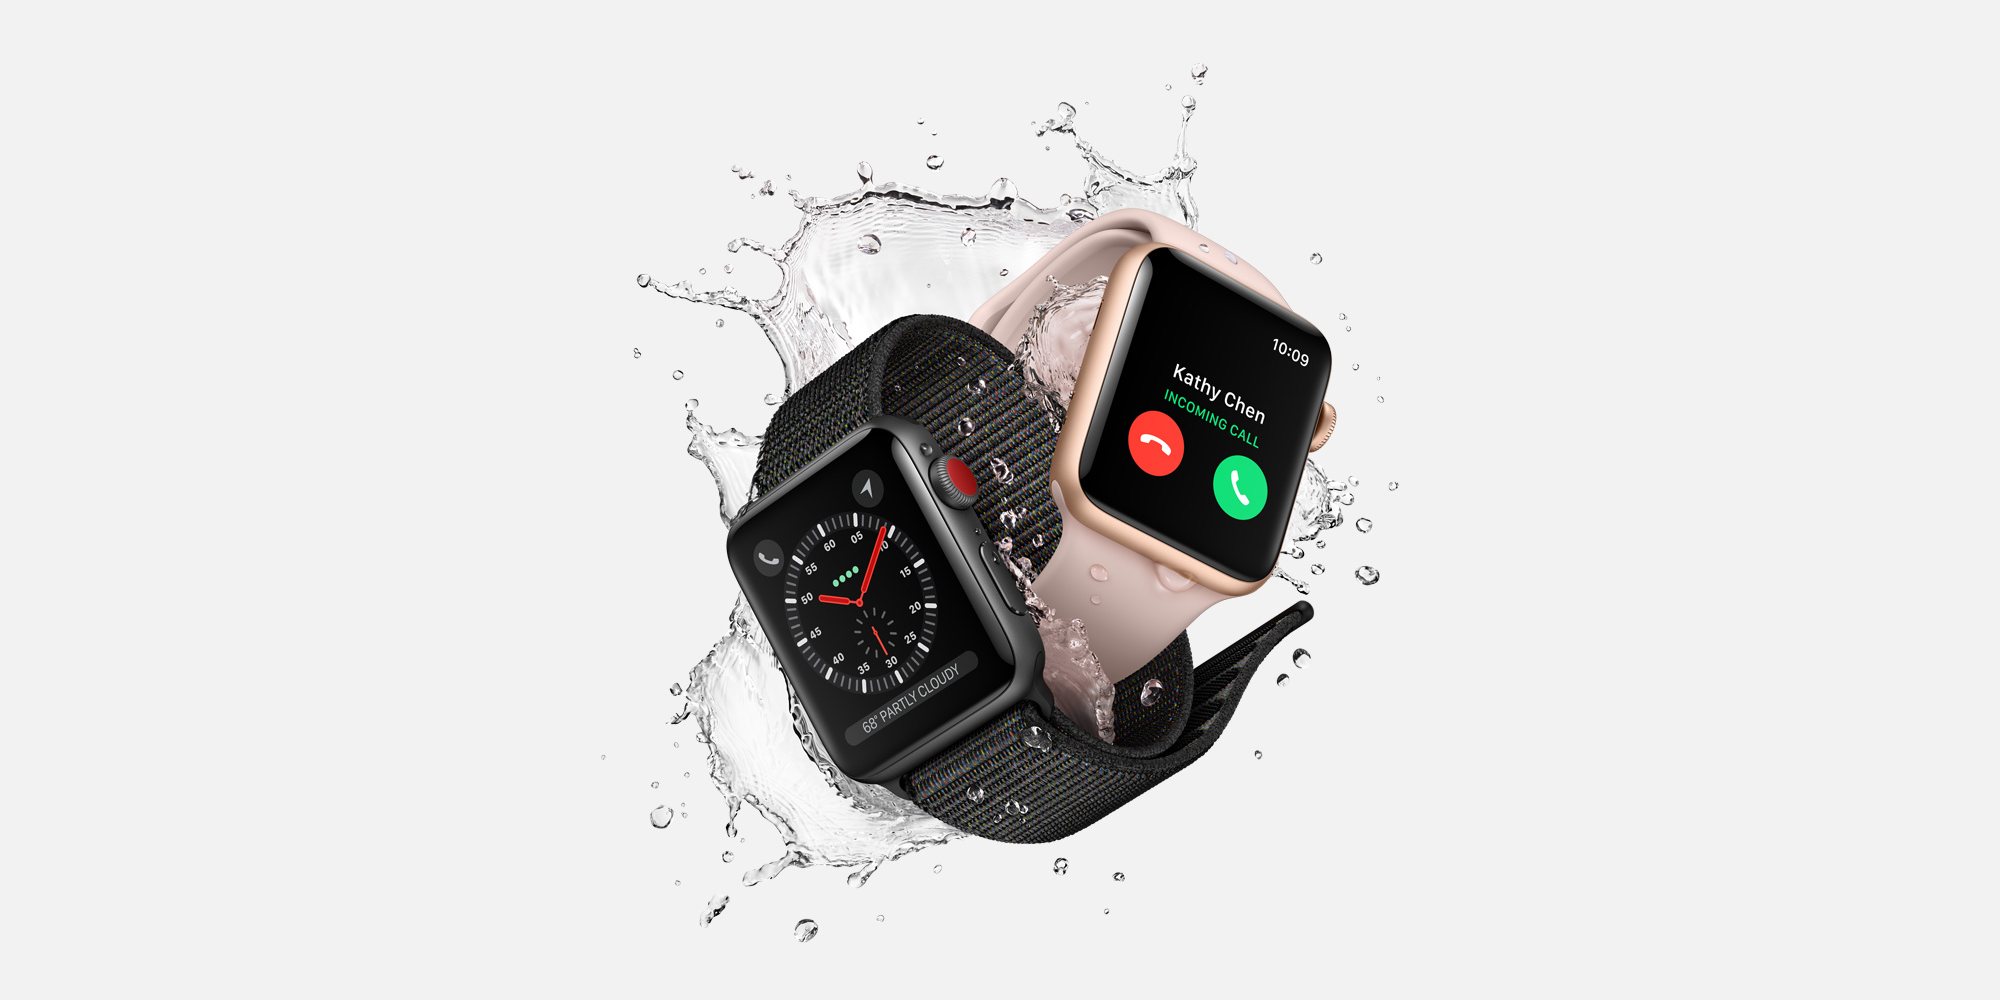 Apple Watch Series 3 has become a white elephant for Apple - 9to5Mac